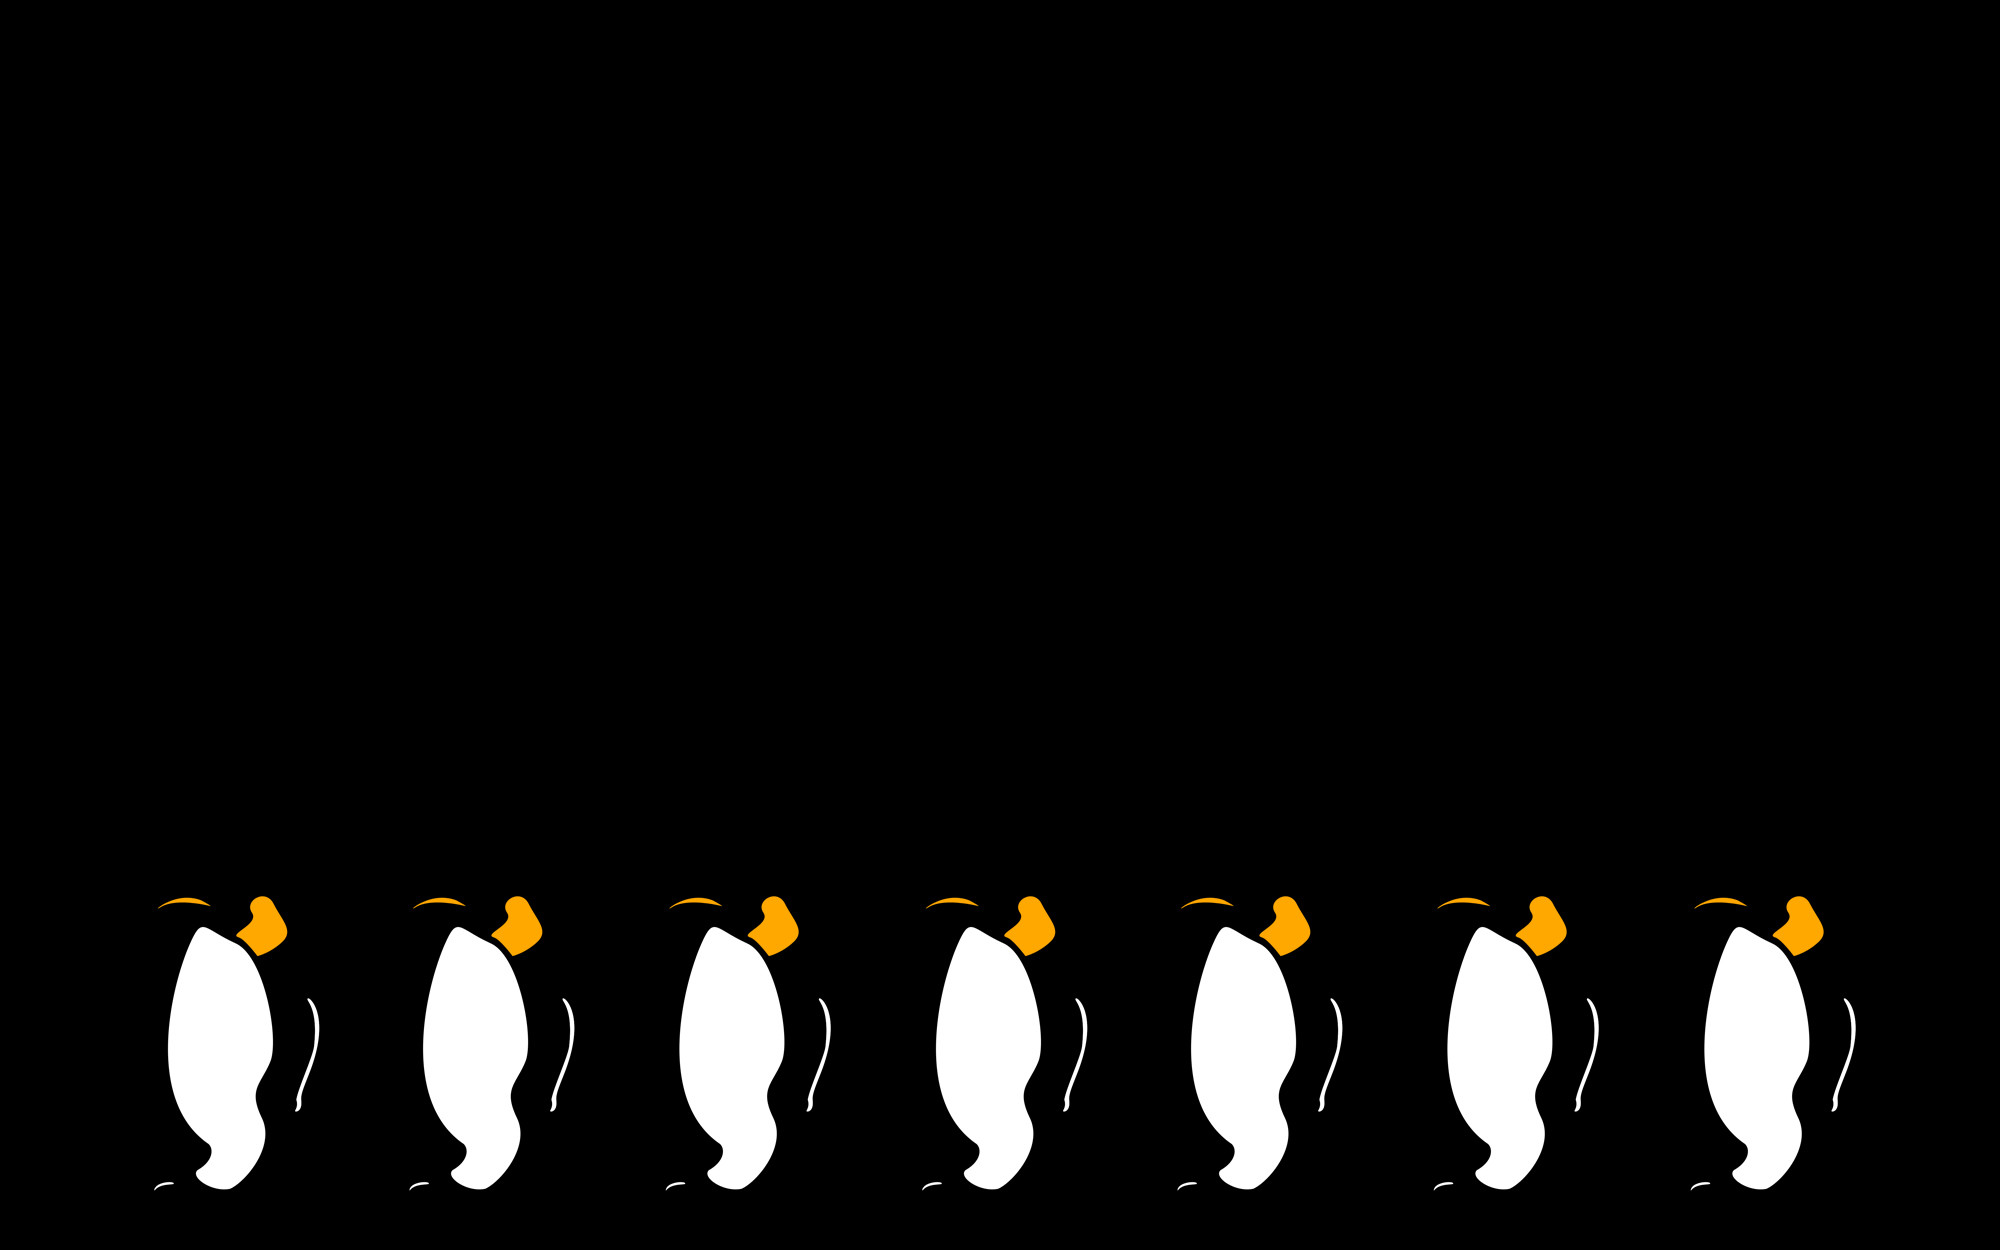 Minimalist Penguin Wallpaper by Fritters Minimalist Penguin Wallpaper by  Fritters